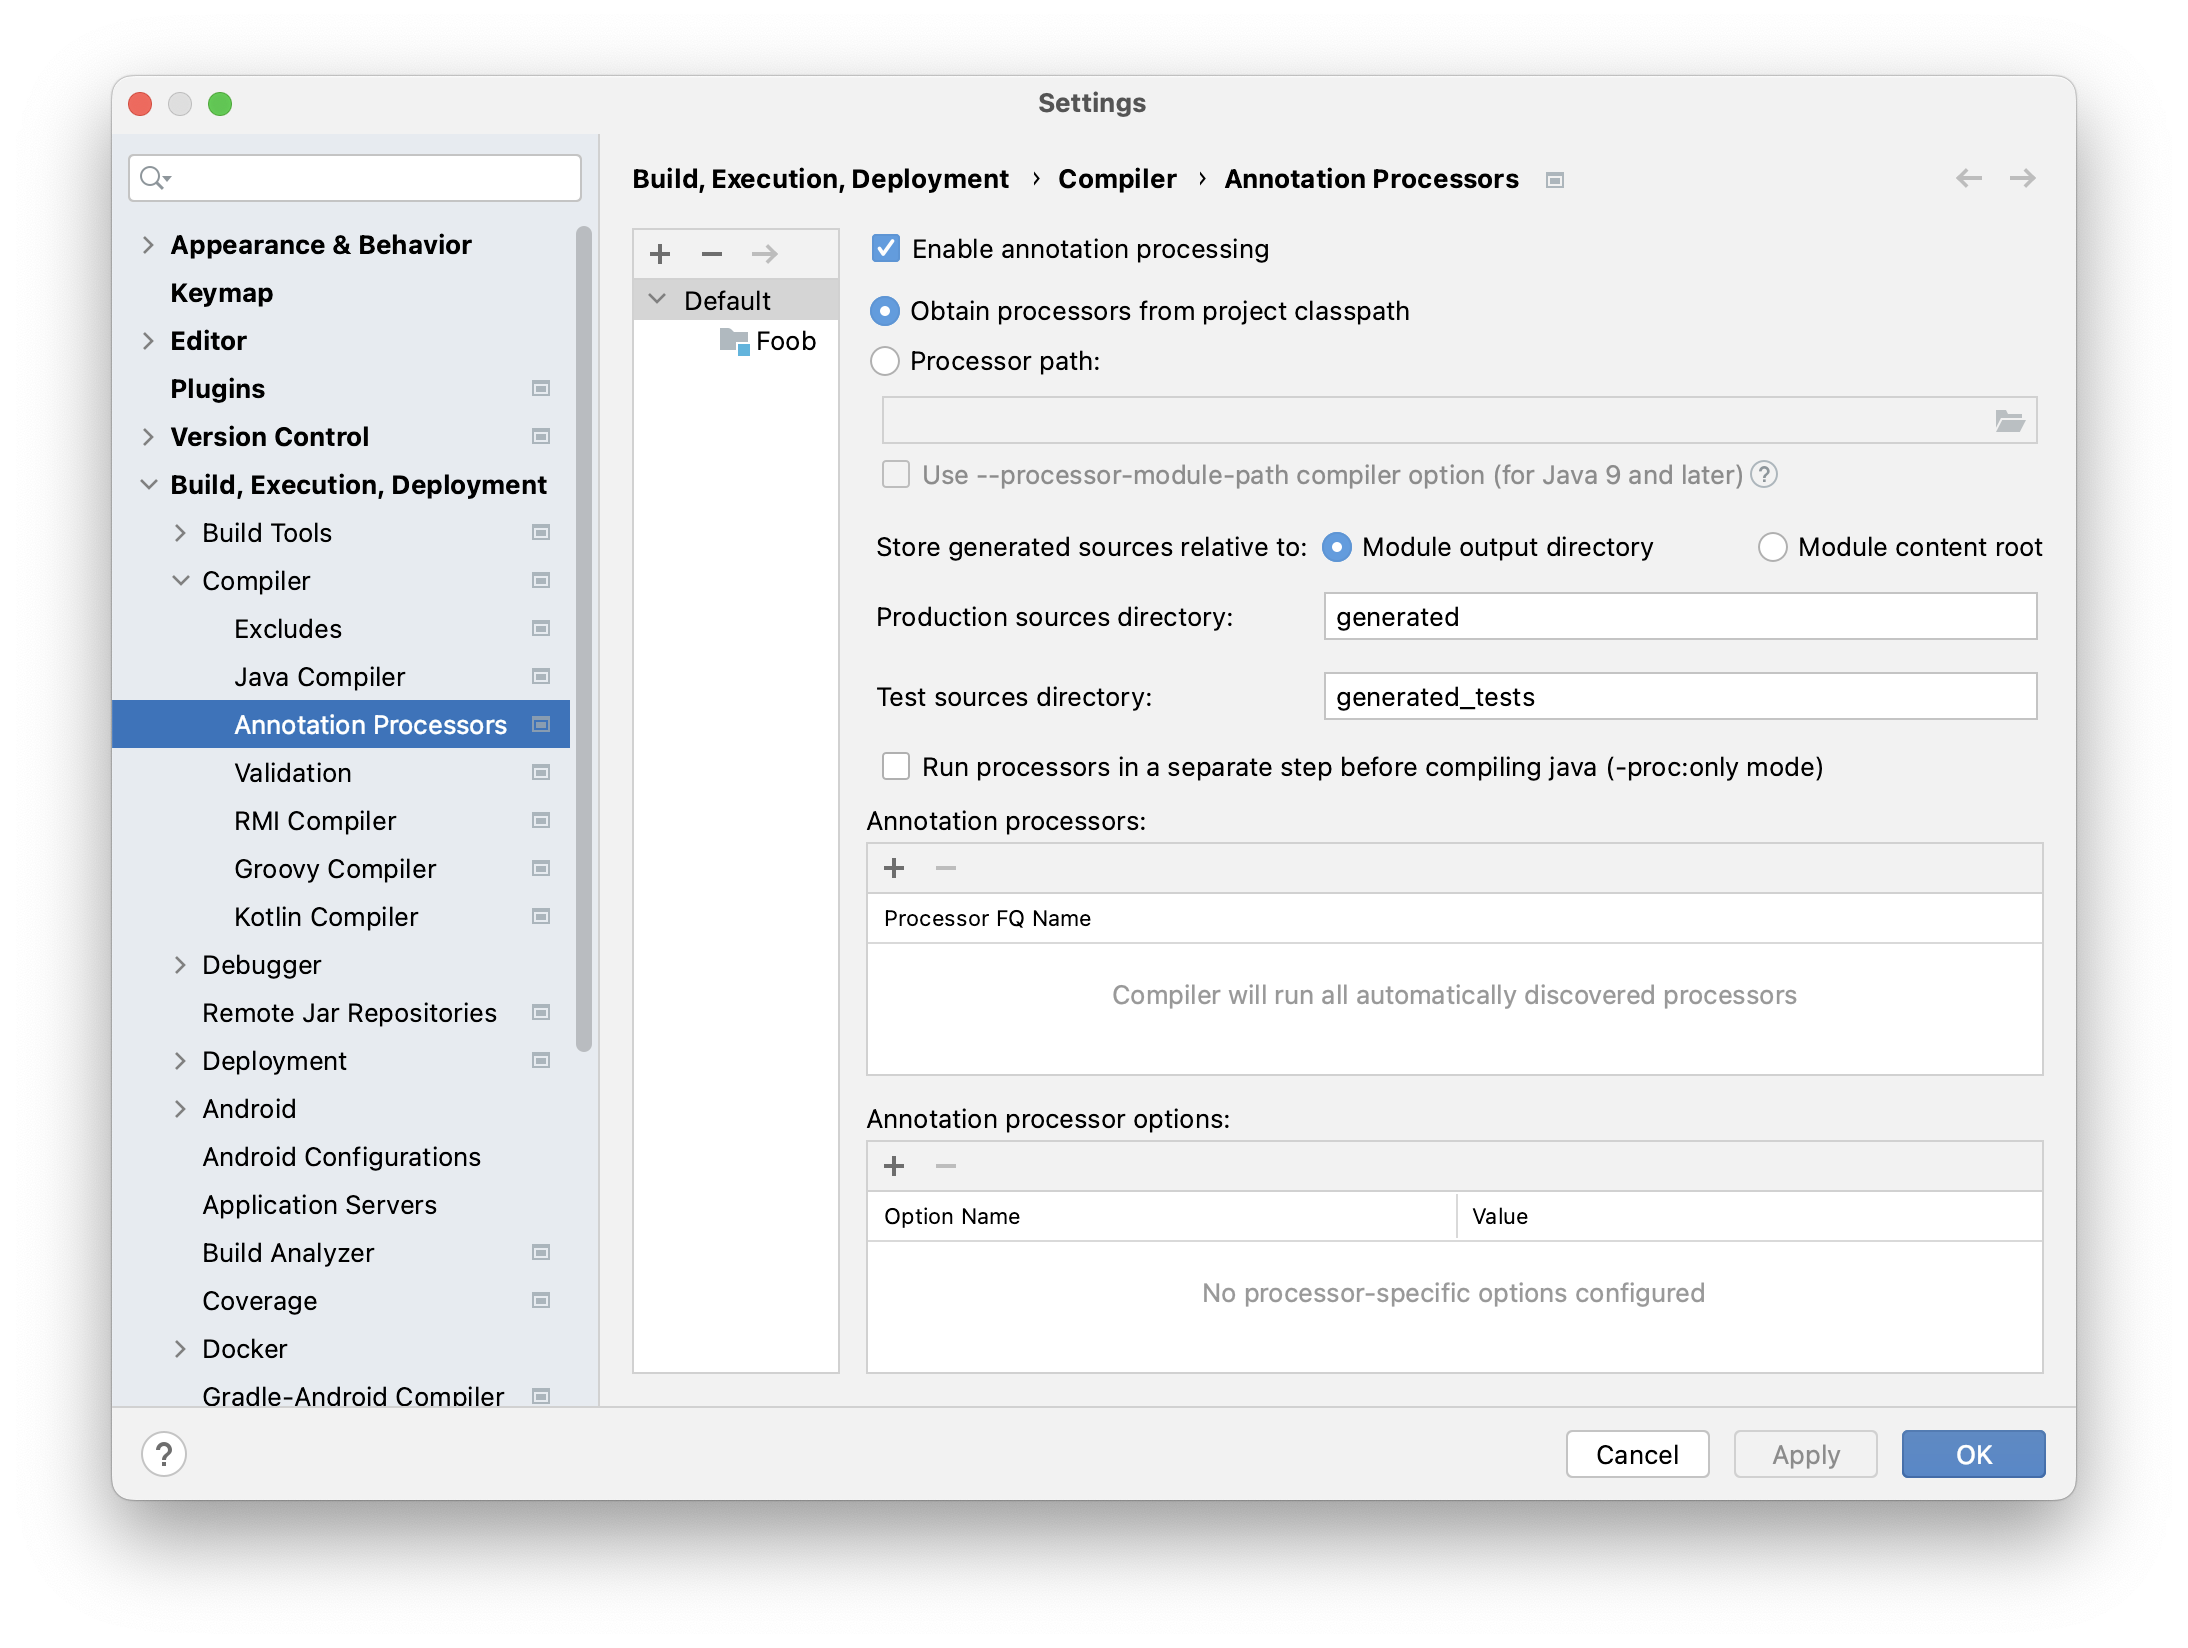 General settings dialog showing “Enable annotation processing” checkbox checked for the project